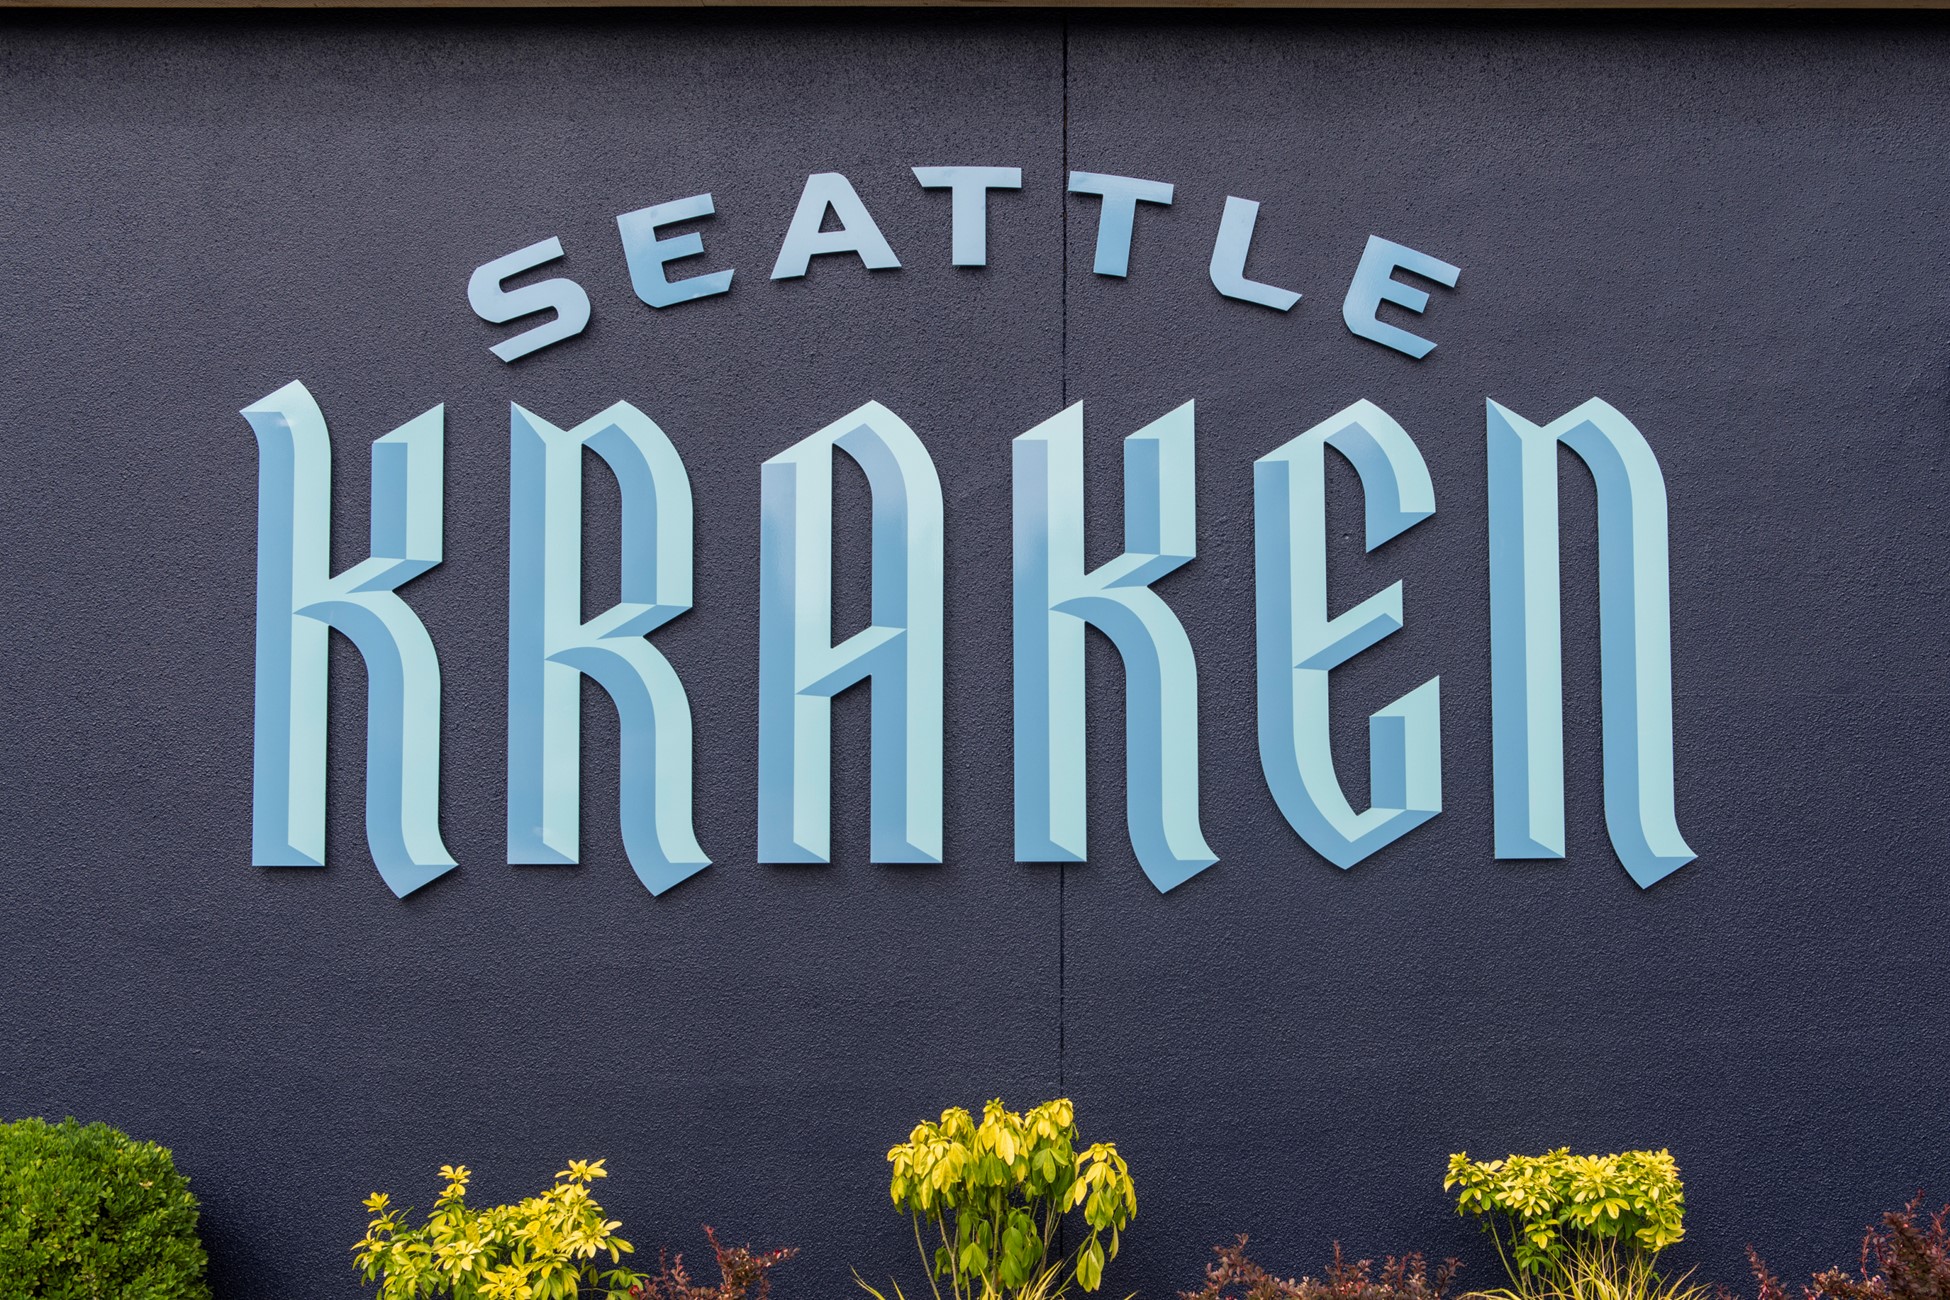 The Seattle Kraken team letters is shown on a wall during NHL free agency.